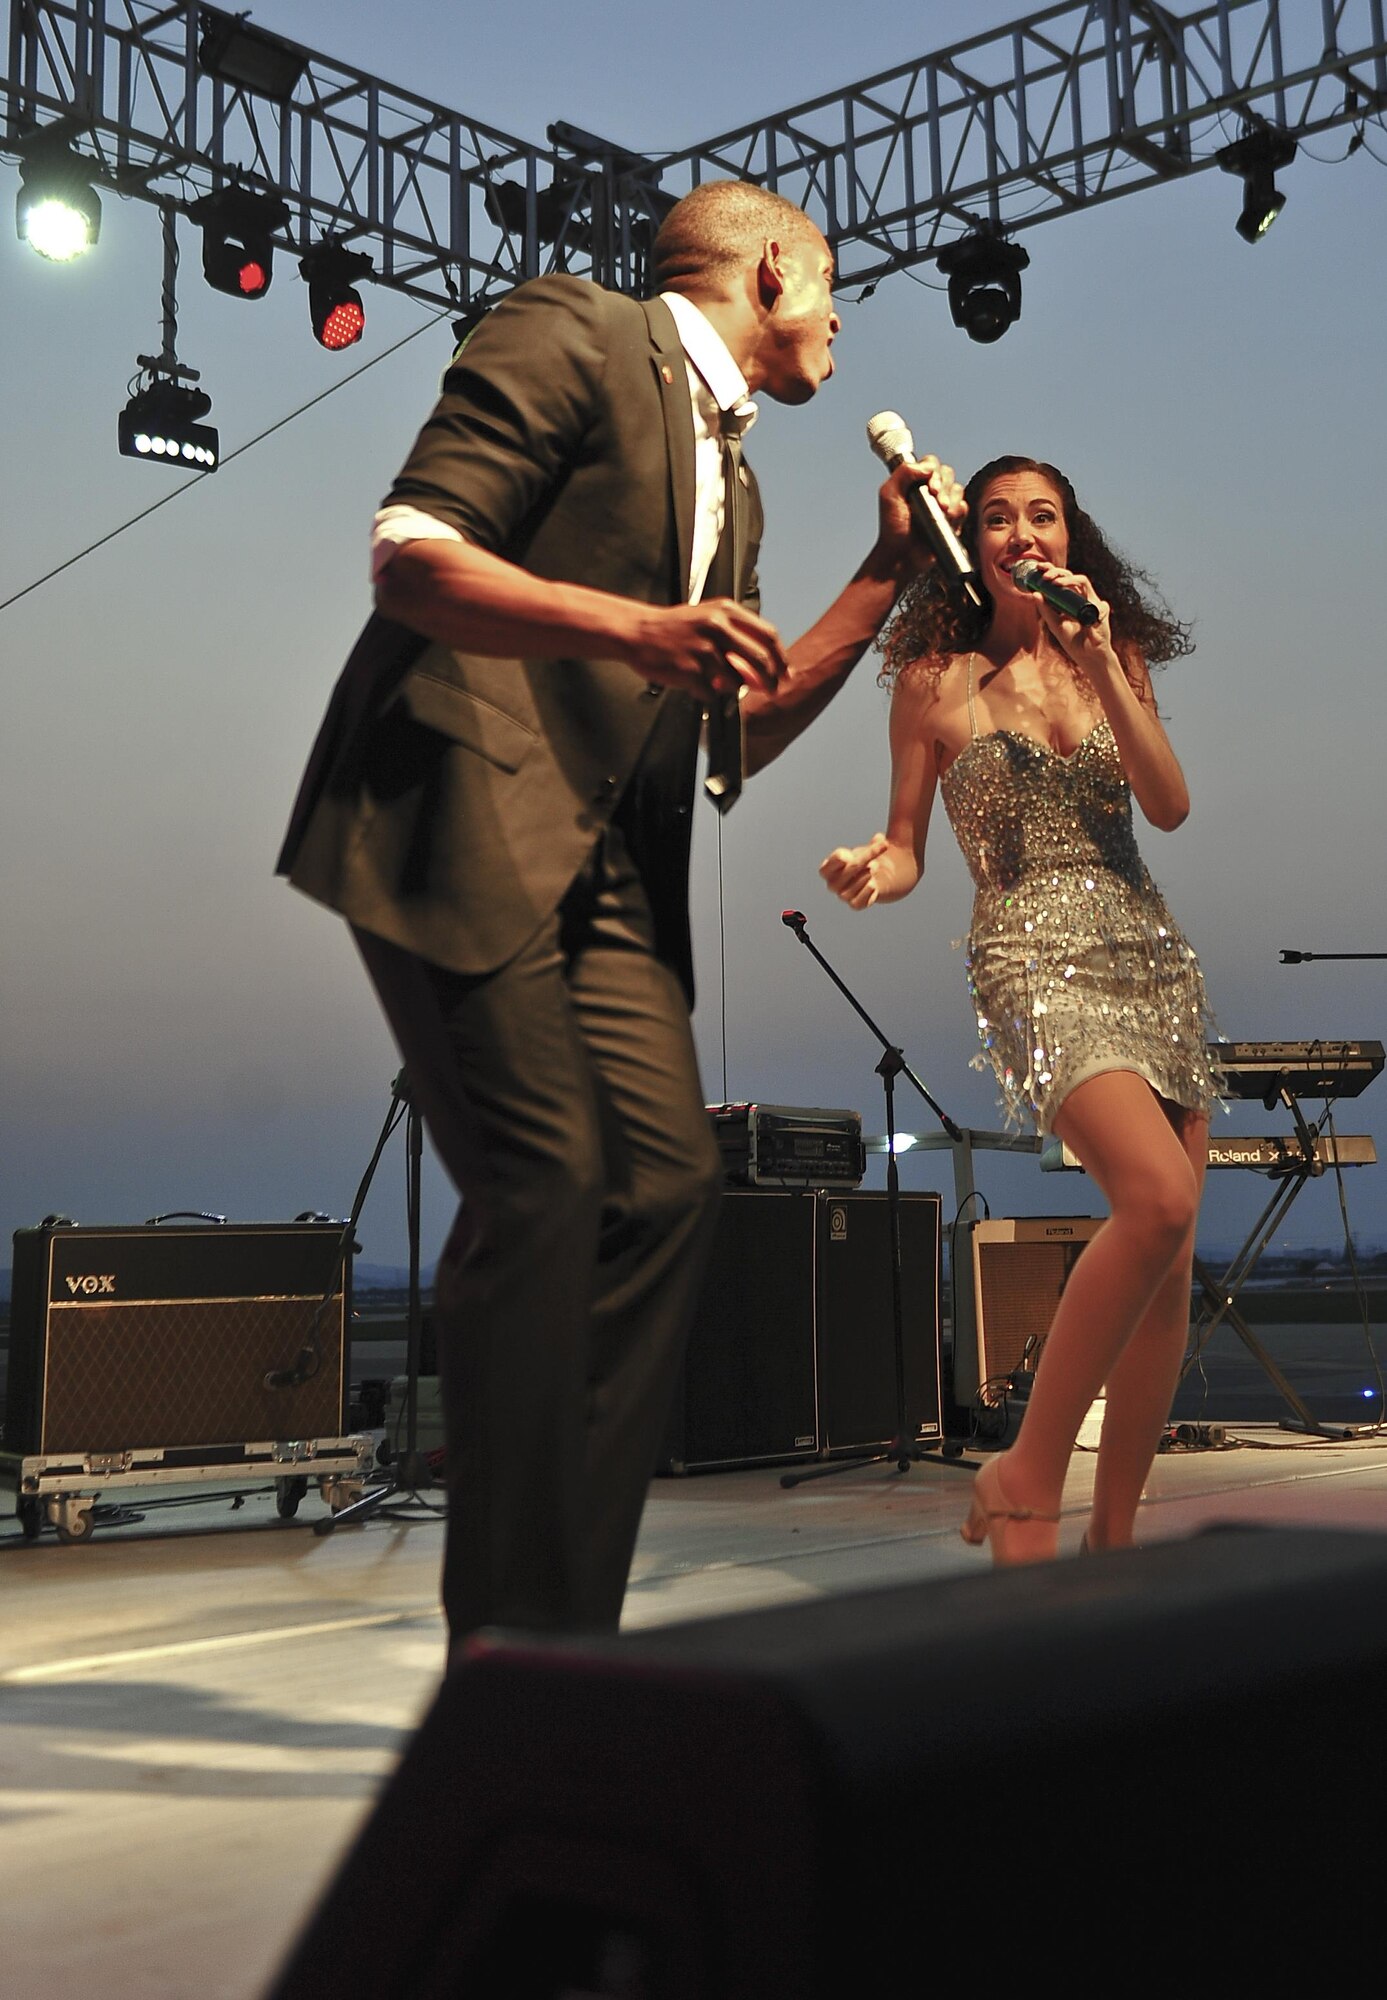 Colby Lewis and Priscilla Fernandez sing top Billboard hit during the Liberty Fest concert July 4, 2015, at Osan Air Base, Republic of Korea. Lewis and Fernandez were part of the USO Show Troupe who sang as part of the entertainment in celebration of Independence Day. (U.S. Air Force photo by Tech. Sgt. Travis Edwards/Released)